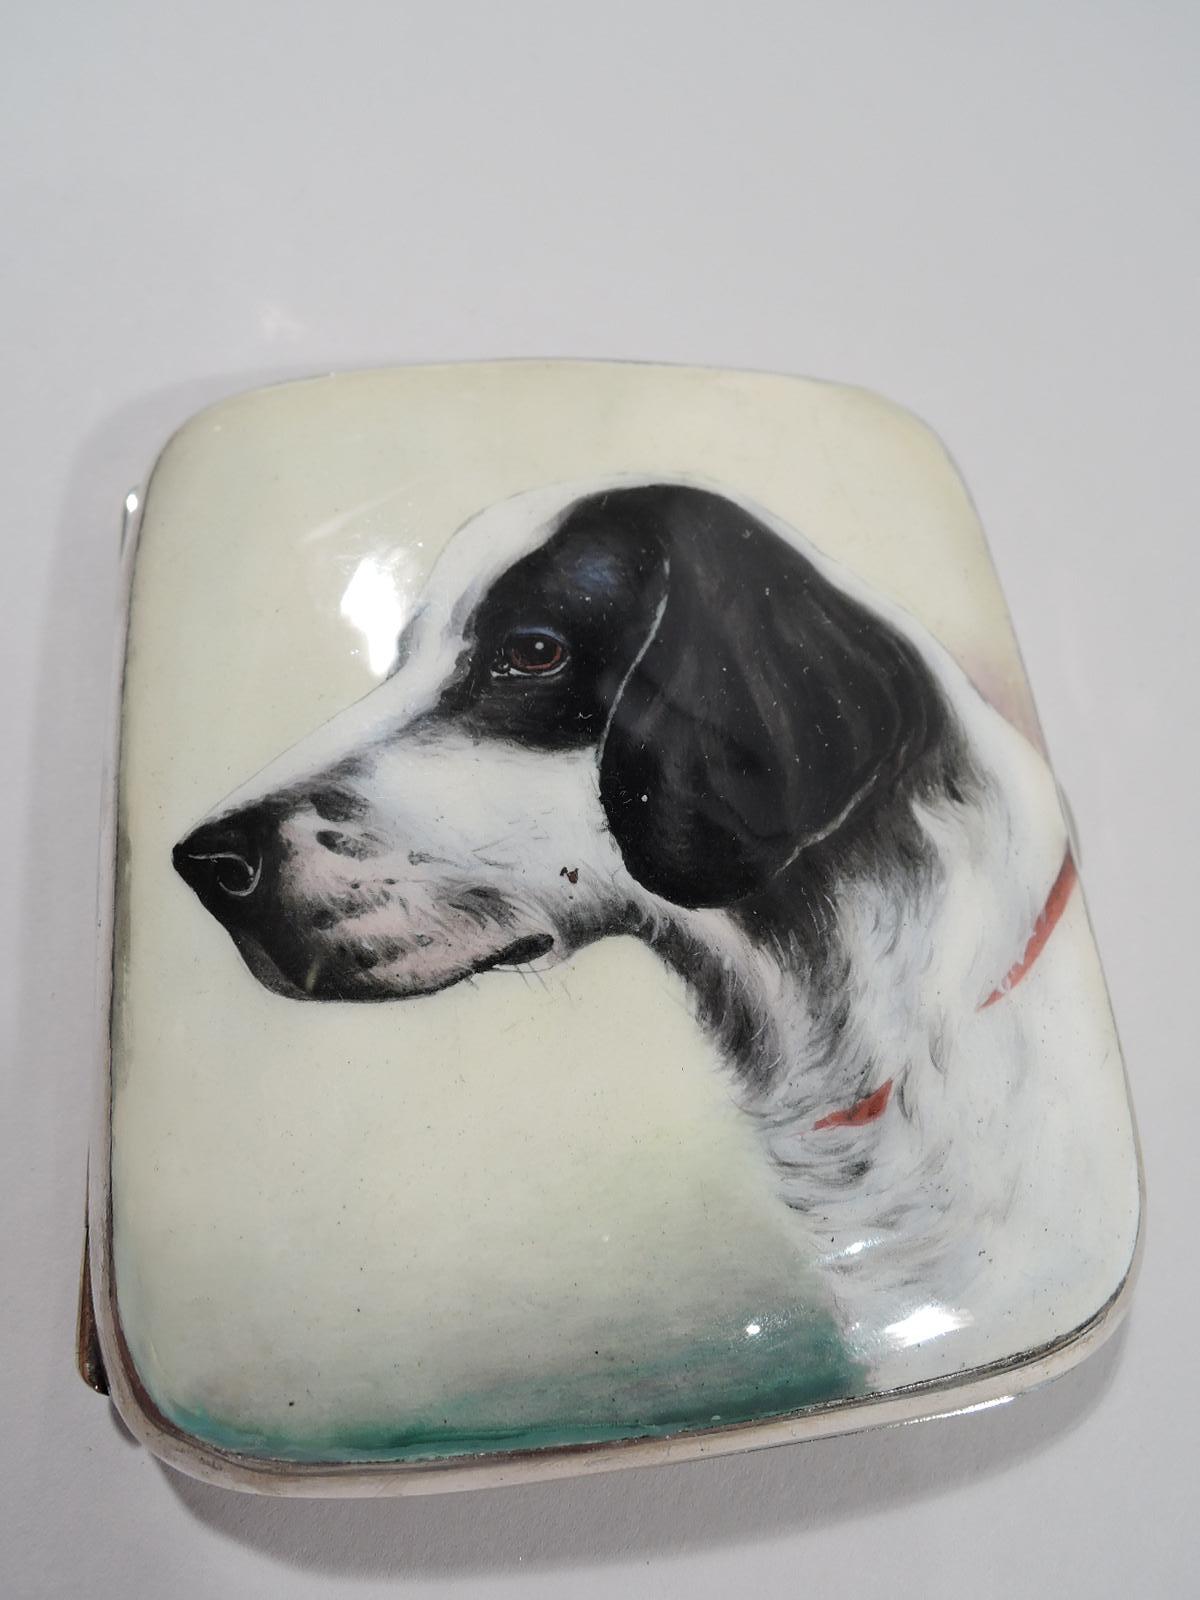 European 800 silver and enamel cigarette case, ca 1910. Rectangular with curved corners and hinged cover. On cover is a bust of a spaniel with nuanced black and white fur with embedded red collar, pinkish nuzzle, and intent brown eye. A sensitive